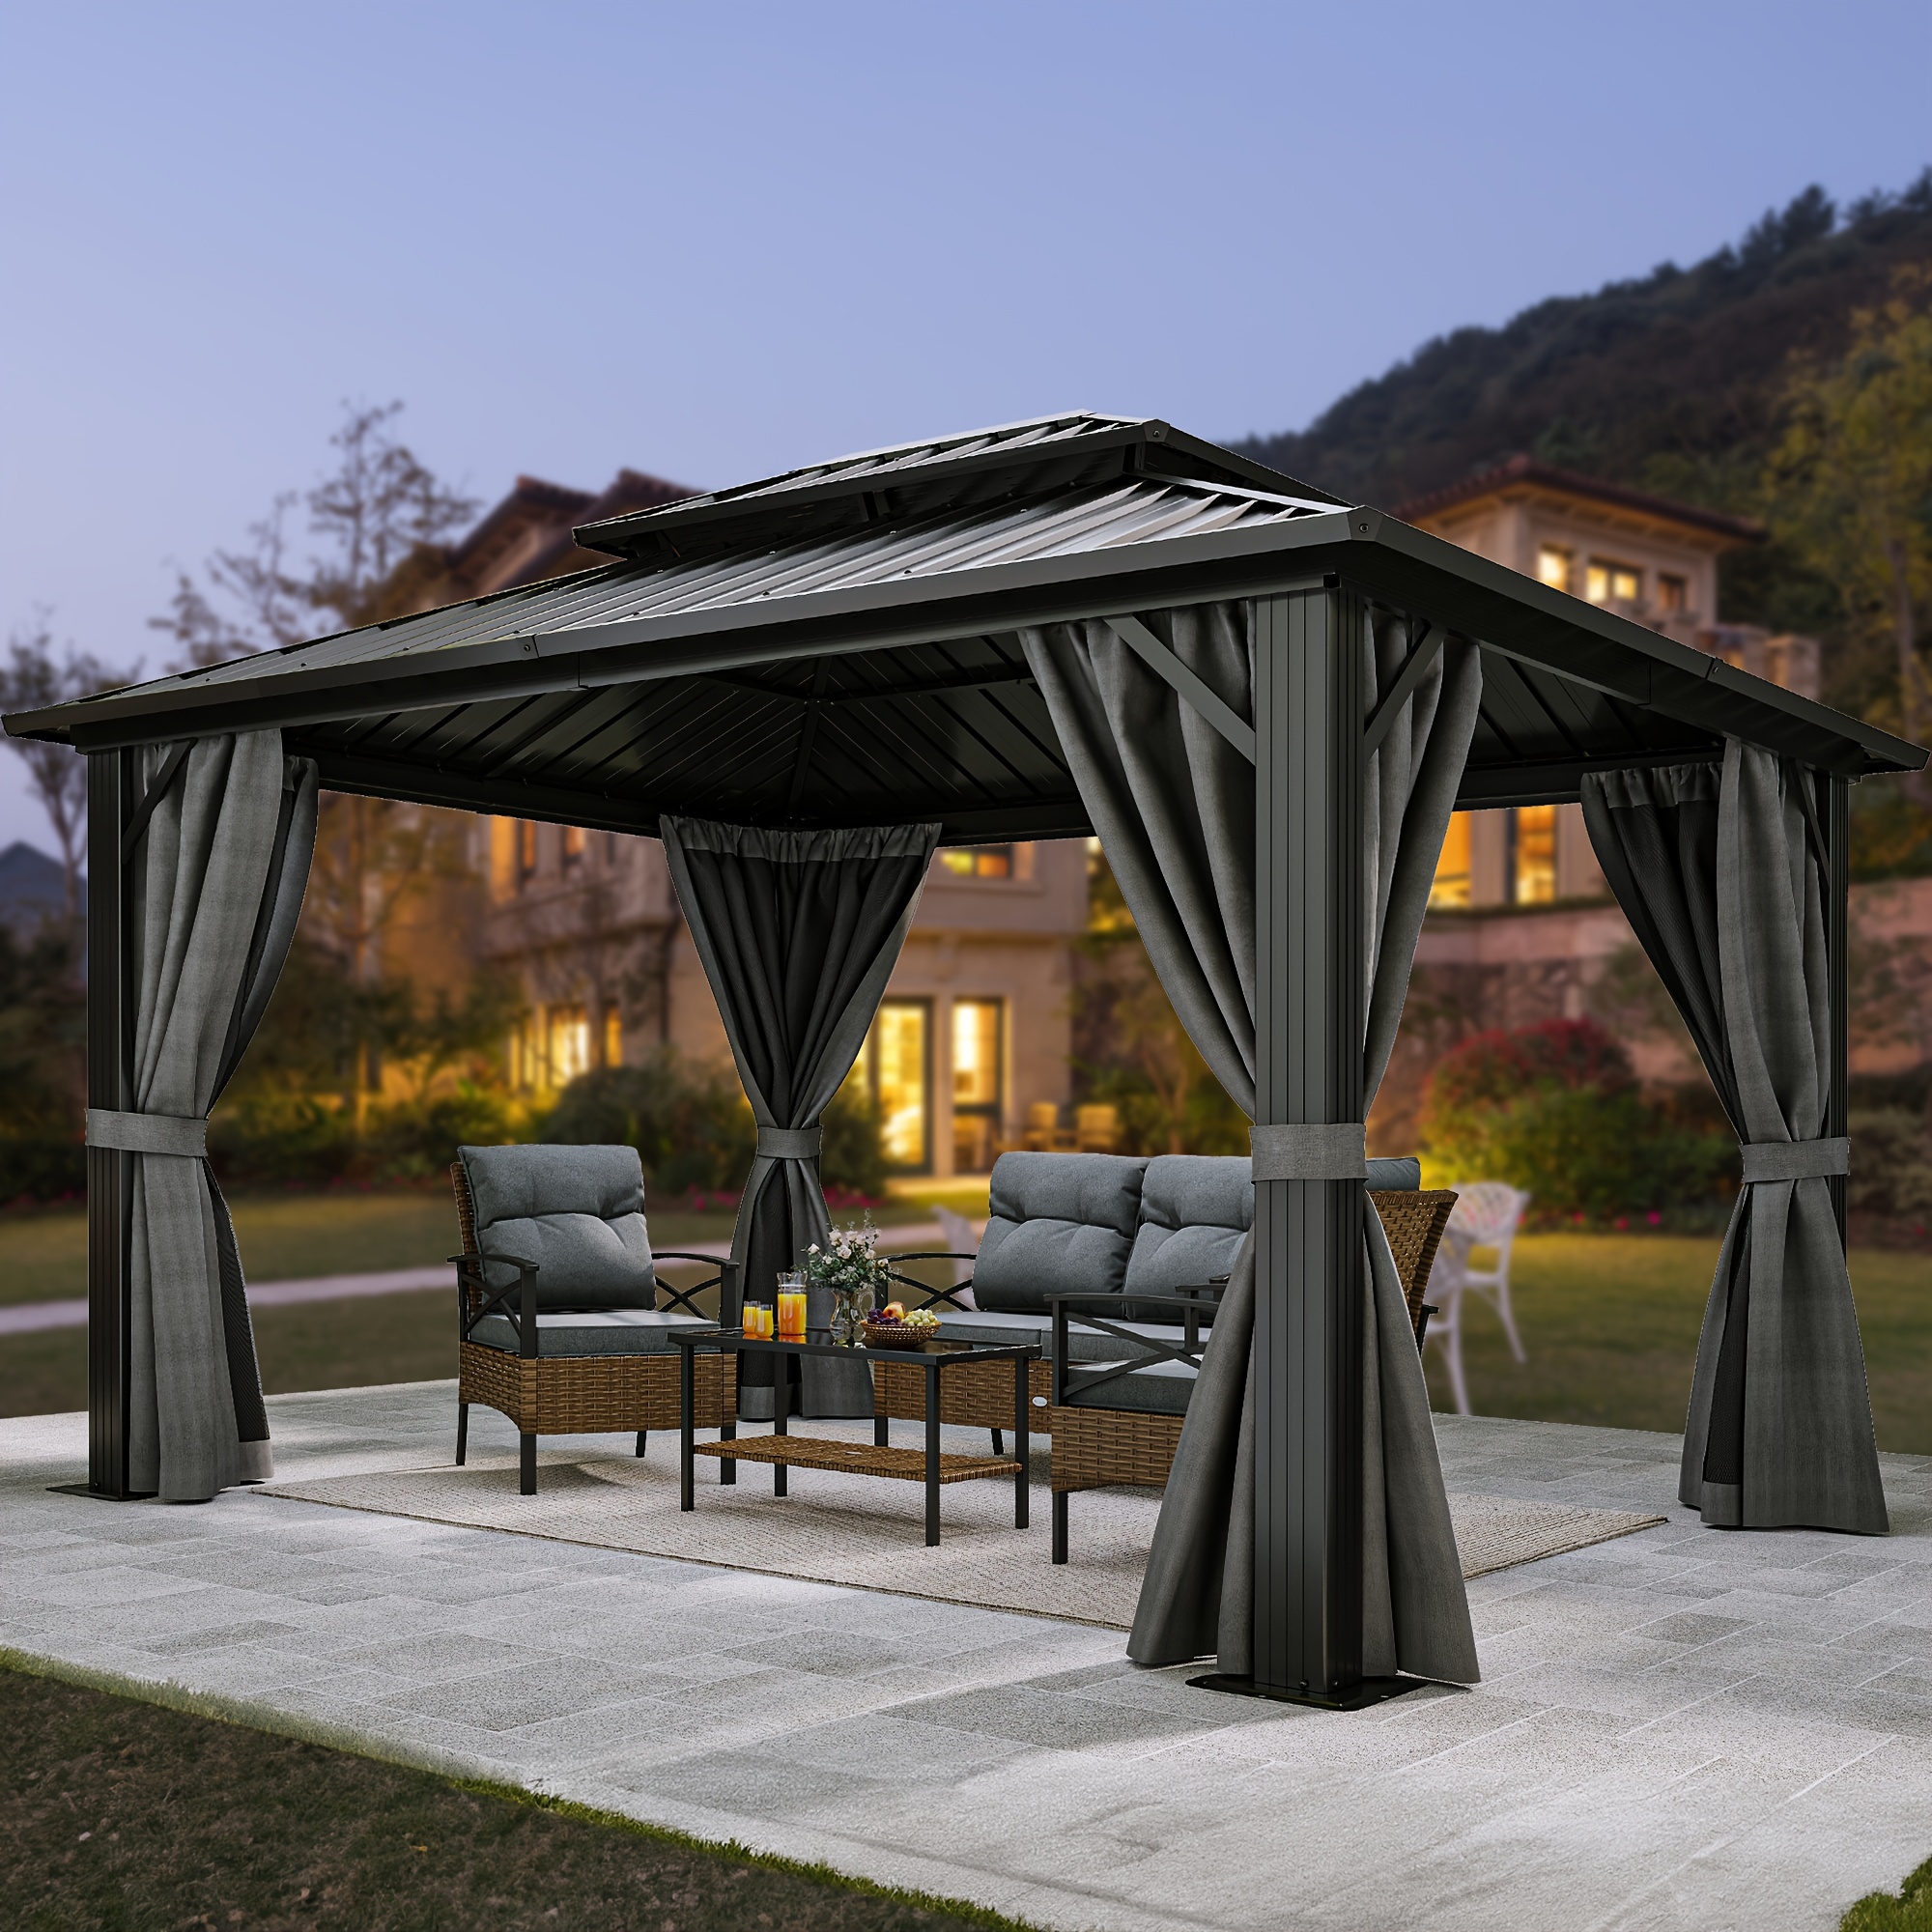 

Quoyad 10x12ft Gazebo Canopy Galvanized W/curtain &netting Outdoor Double Roof